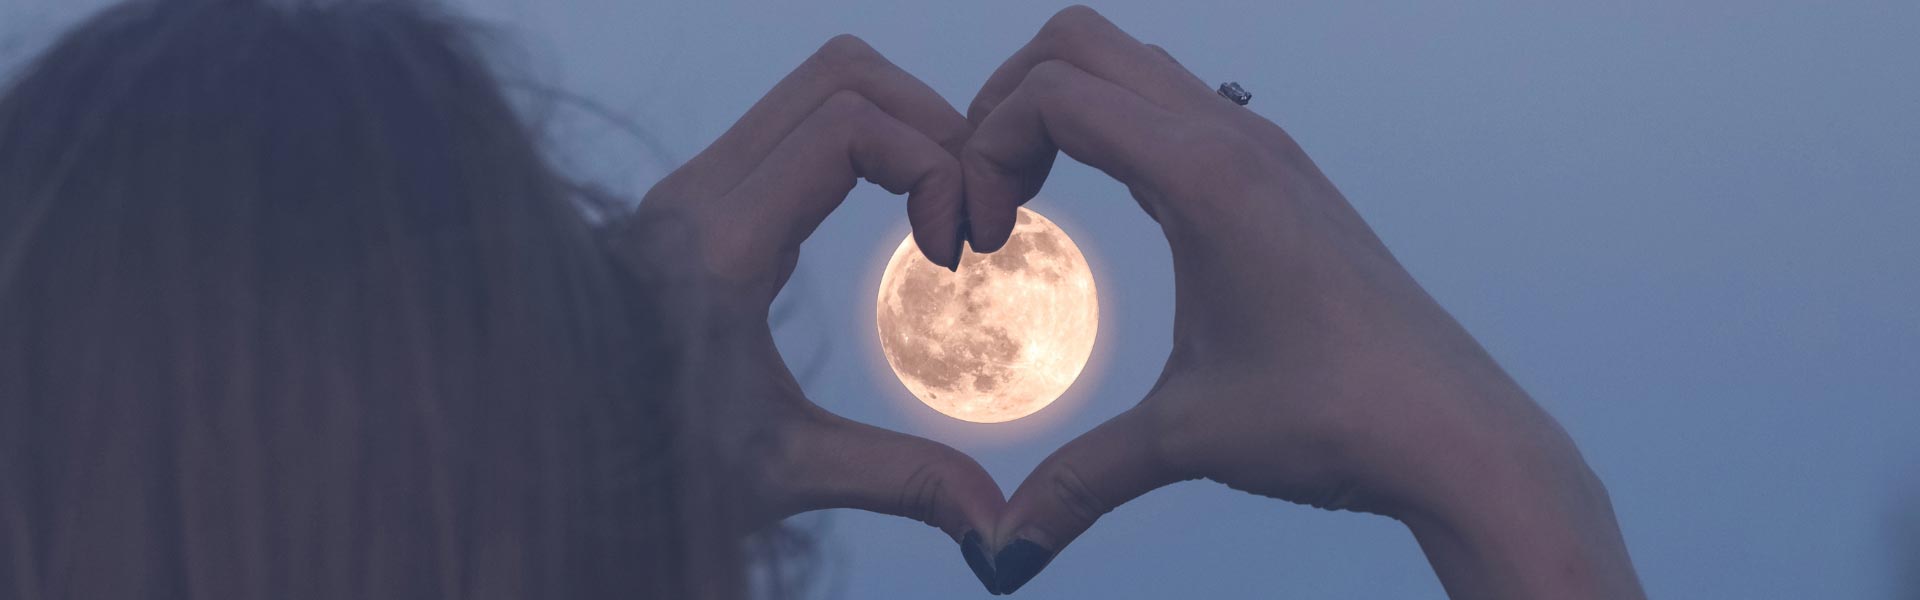 A woman forming her hands as a heart over the Moon